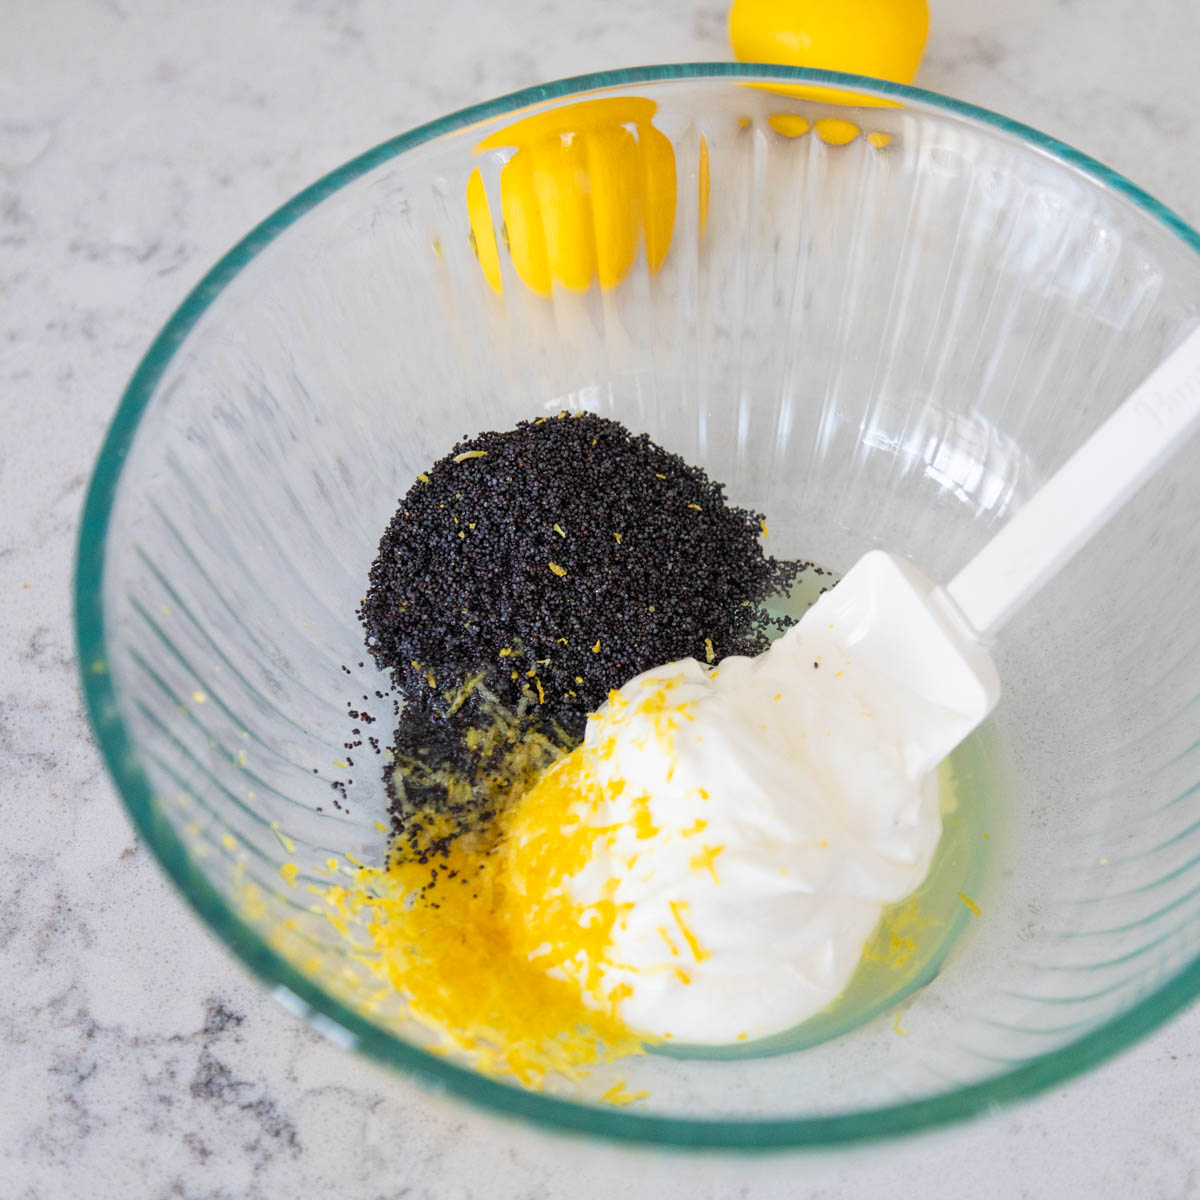 The lemon zest and poppy seeds are mixed into the sour cream in a separate small bowl.